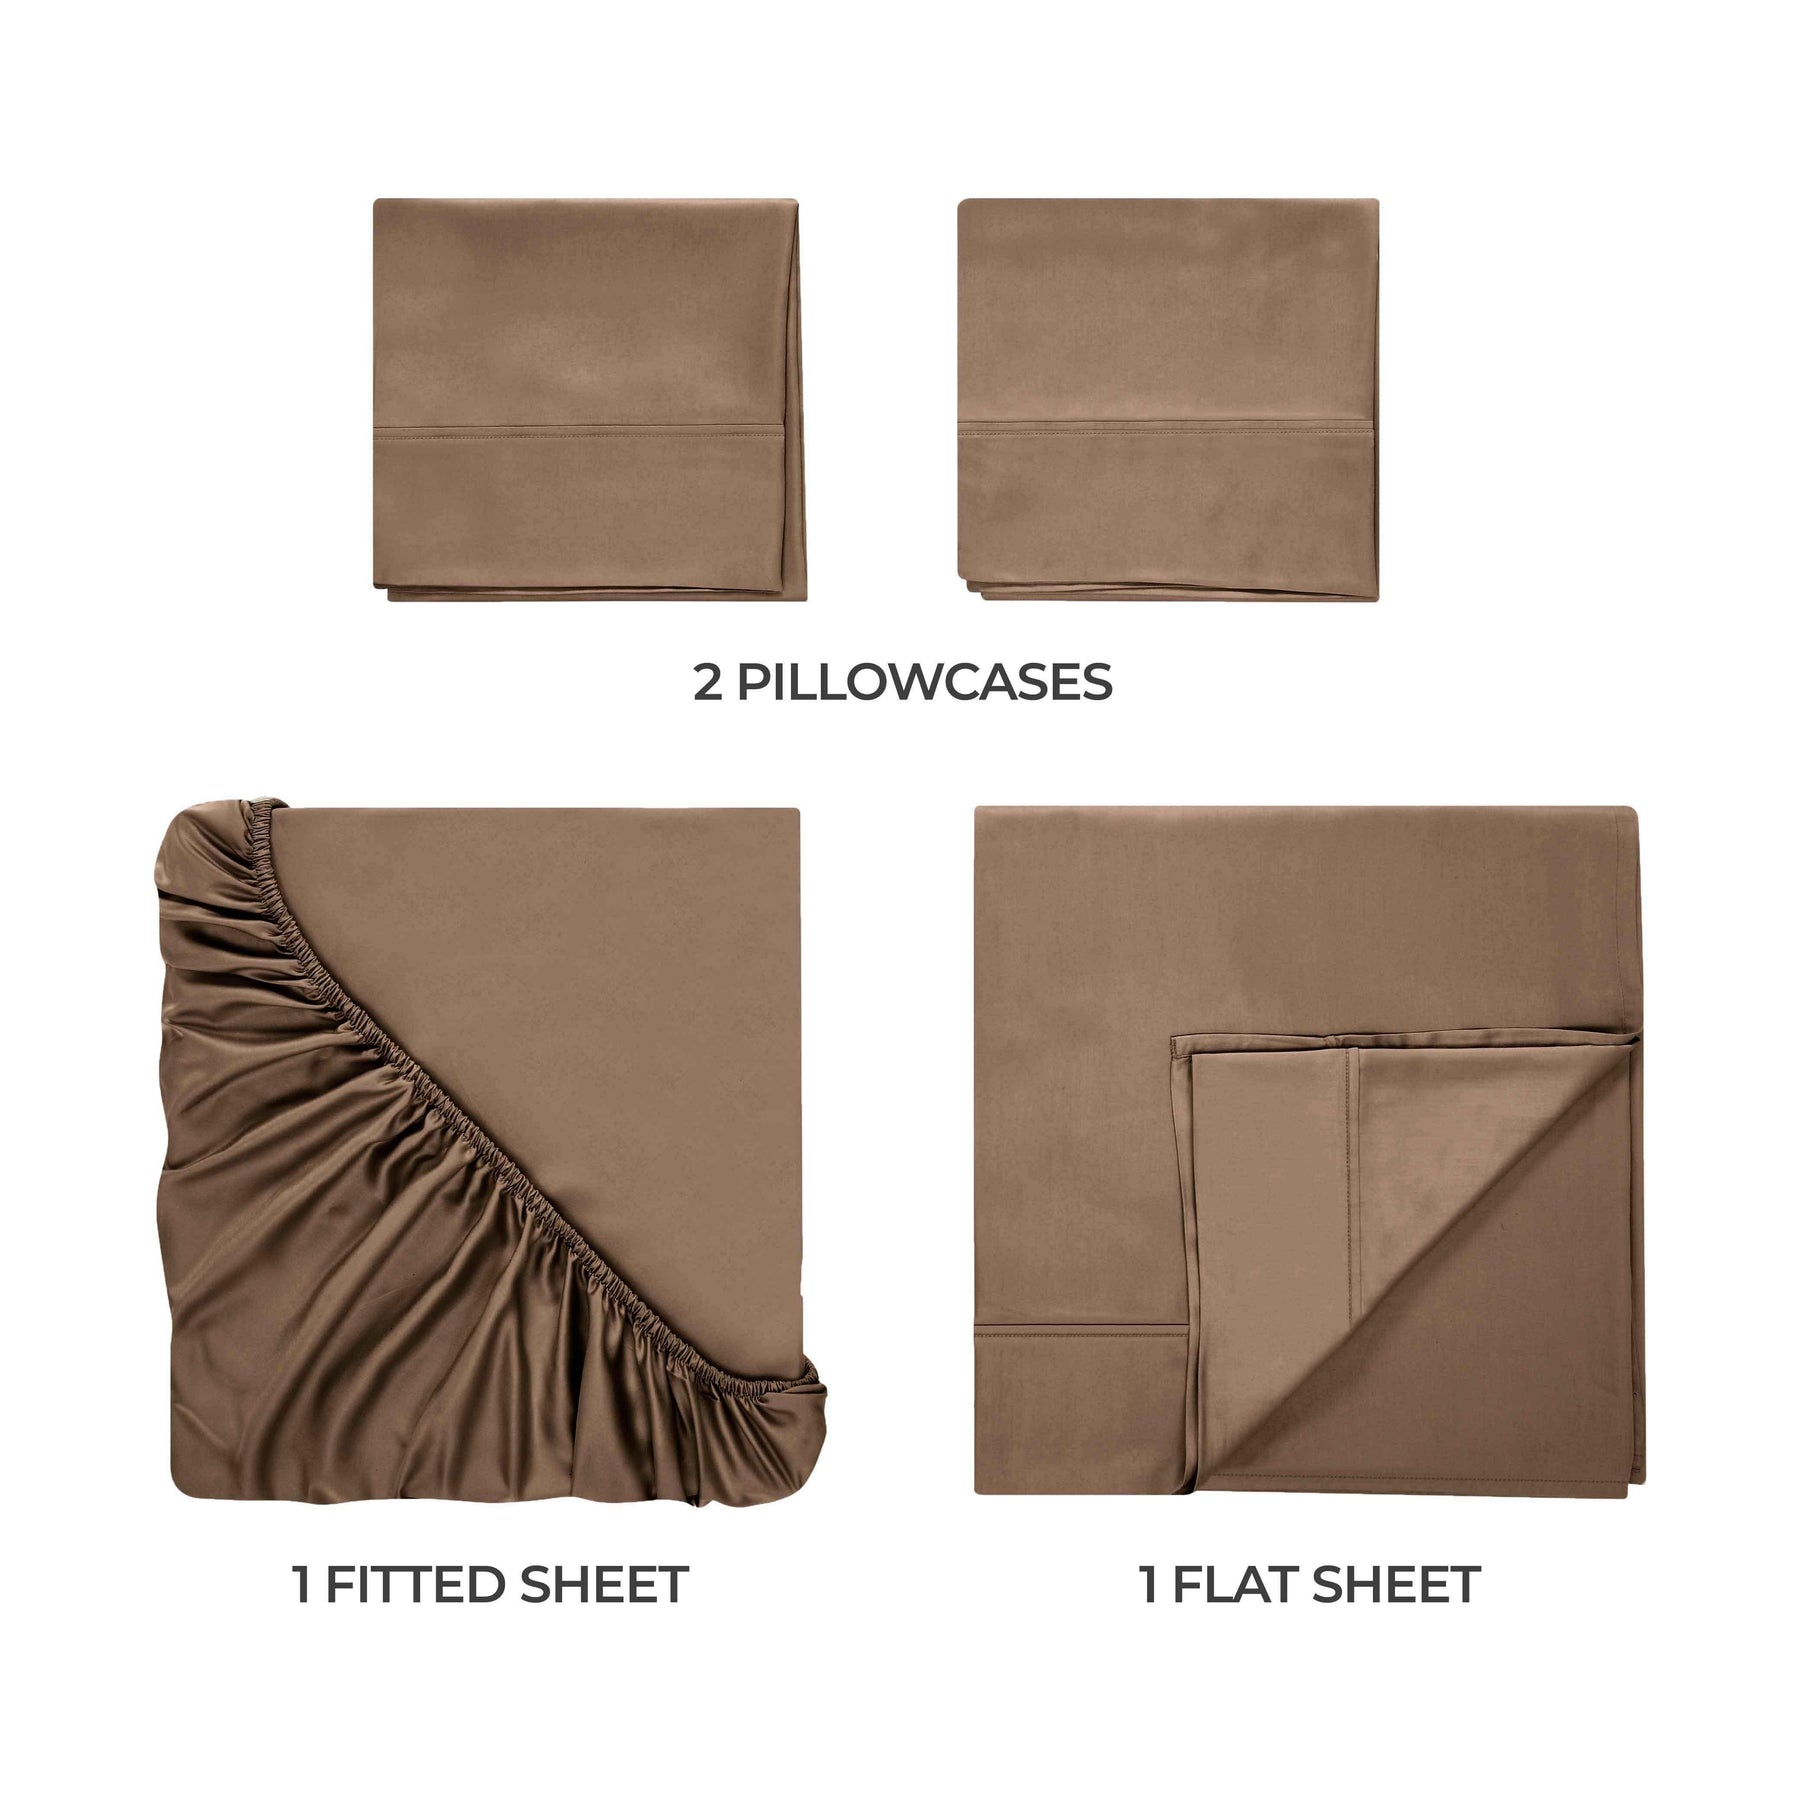 Egyptian Cotton 400 Thread Count Solid Deep Pocket Sheet Set - Sheet Set by Superior - Superior 